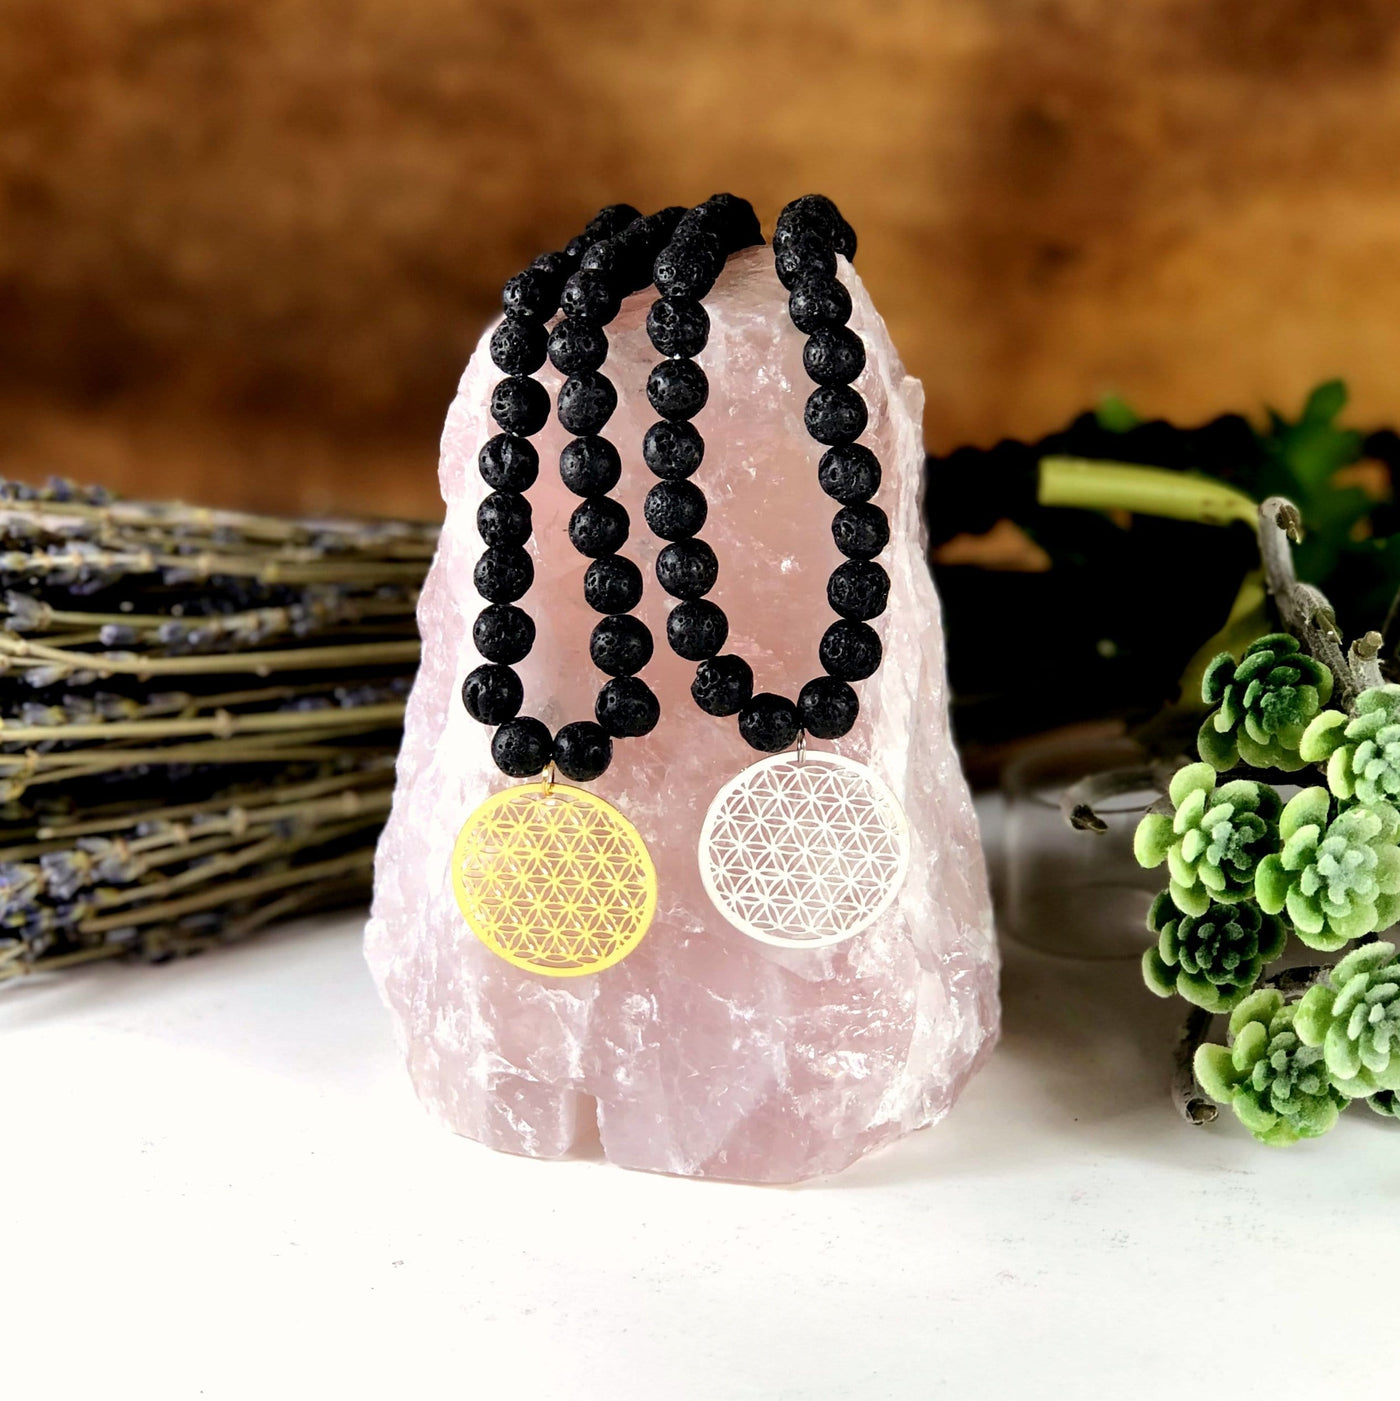 Diffuser Necklace Lava Bead with Flower of Life Charm in Gold/Silver tone in Top Of Rough Rose Lamp on Brown Background.